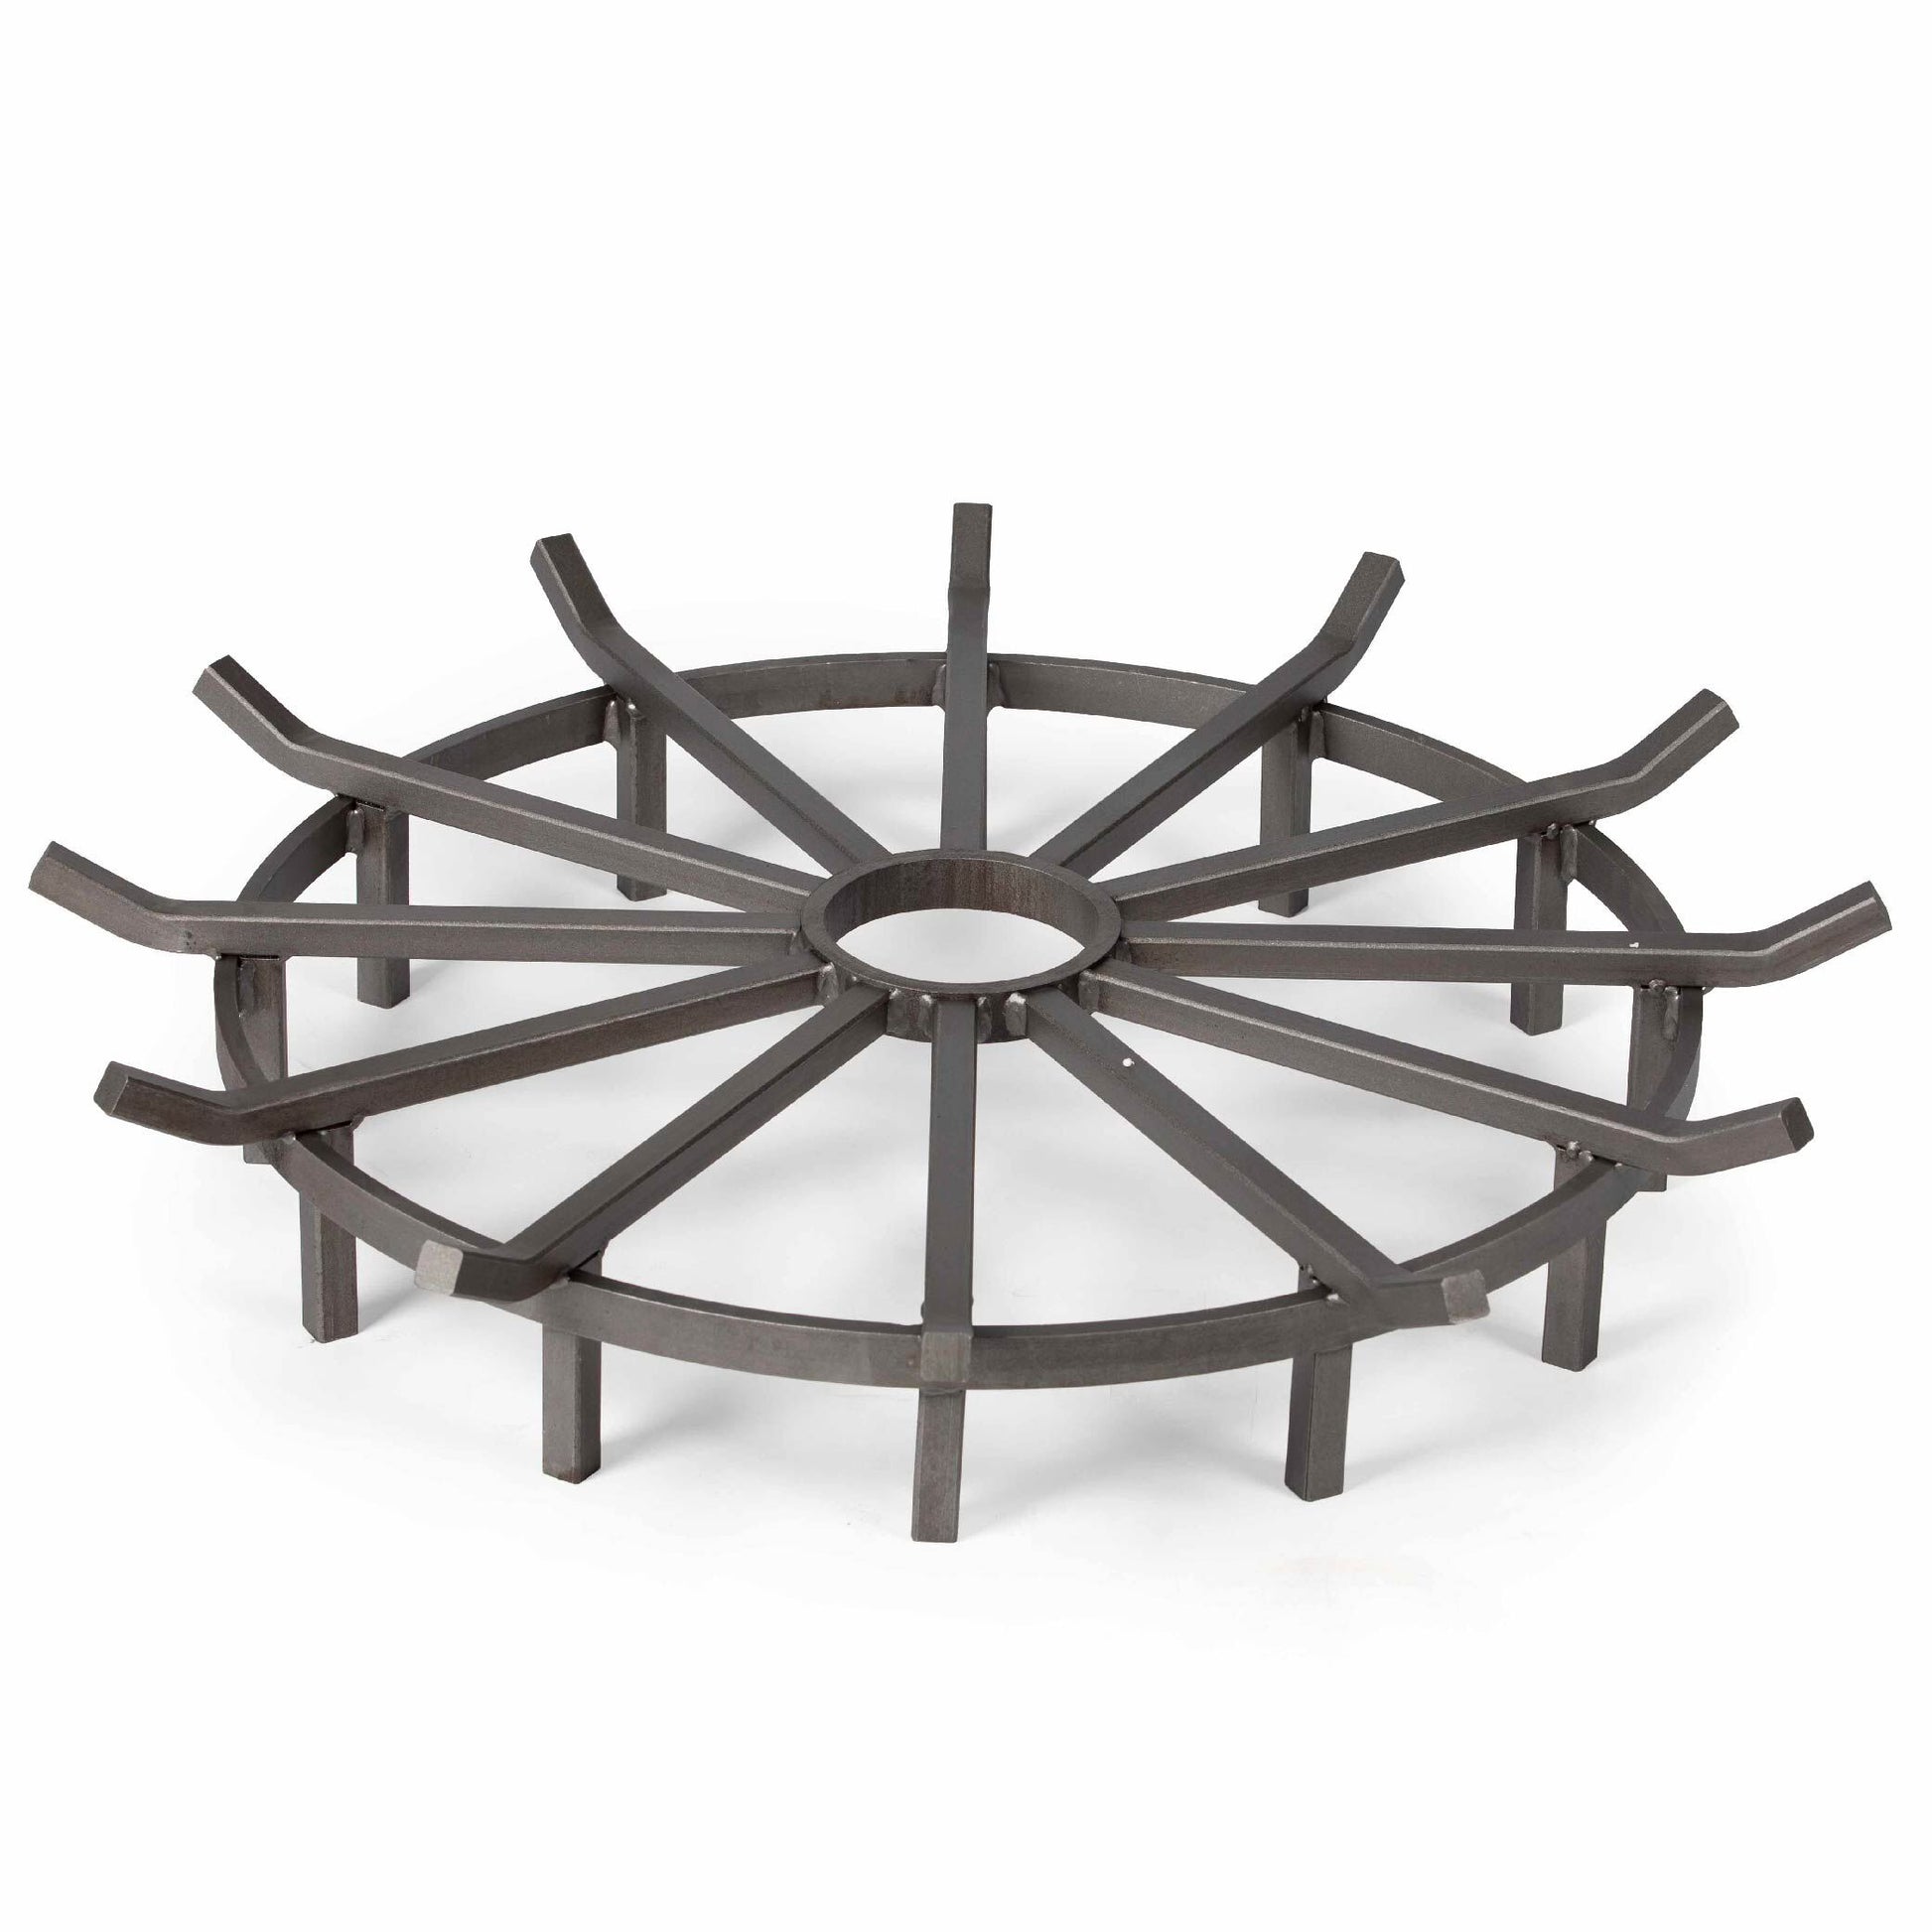 Scratch and Dent - 32-in Wagon Wheel Fire Grate - FINAL SALE